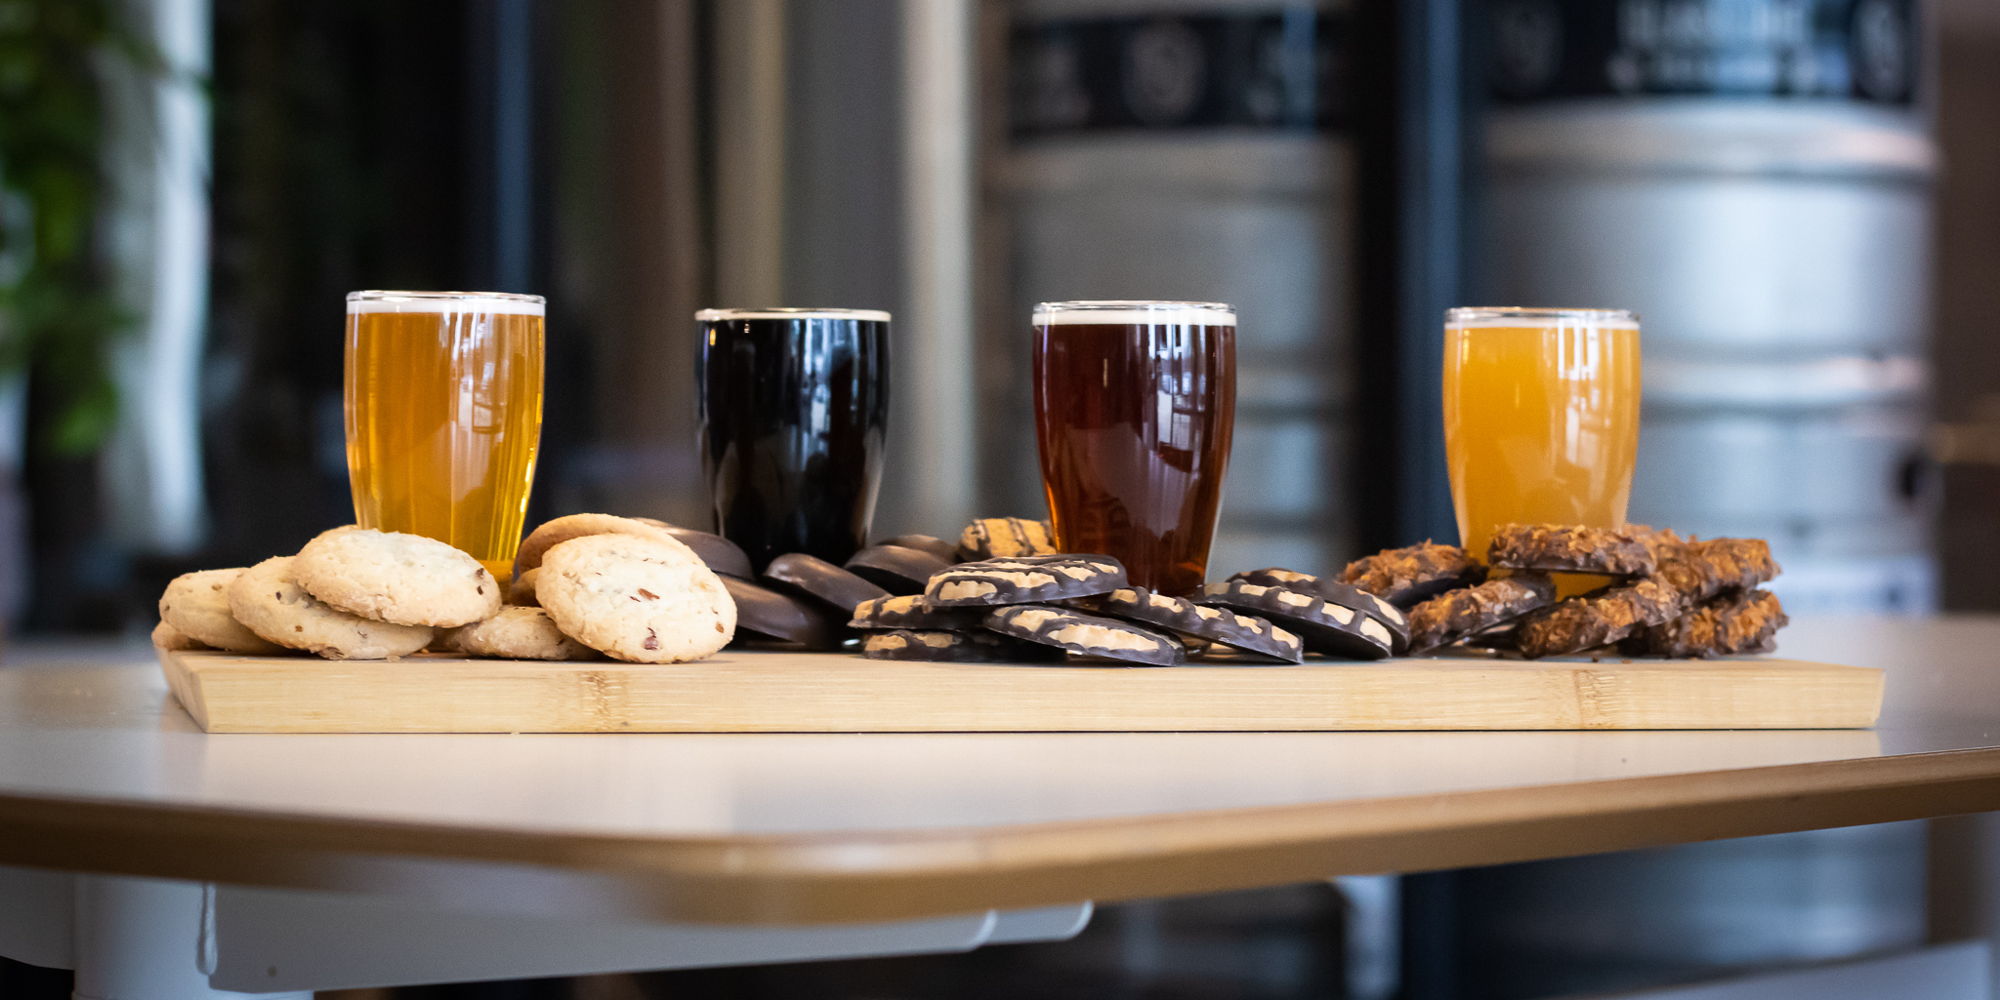 Girl Scout Cookie & Beer Pairing promotional image